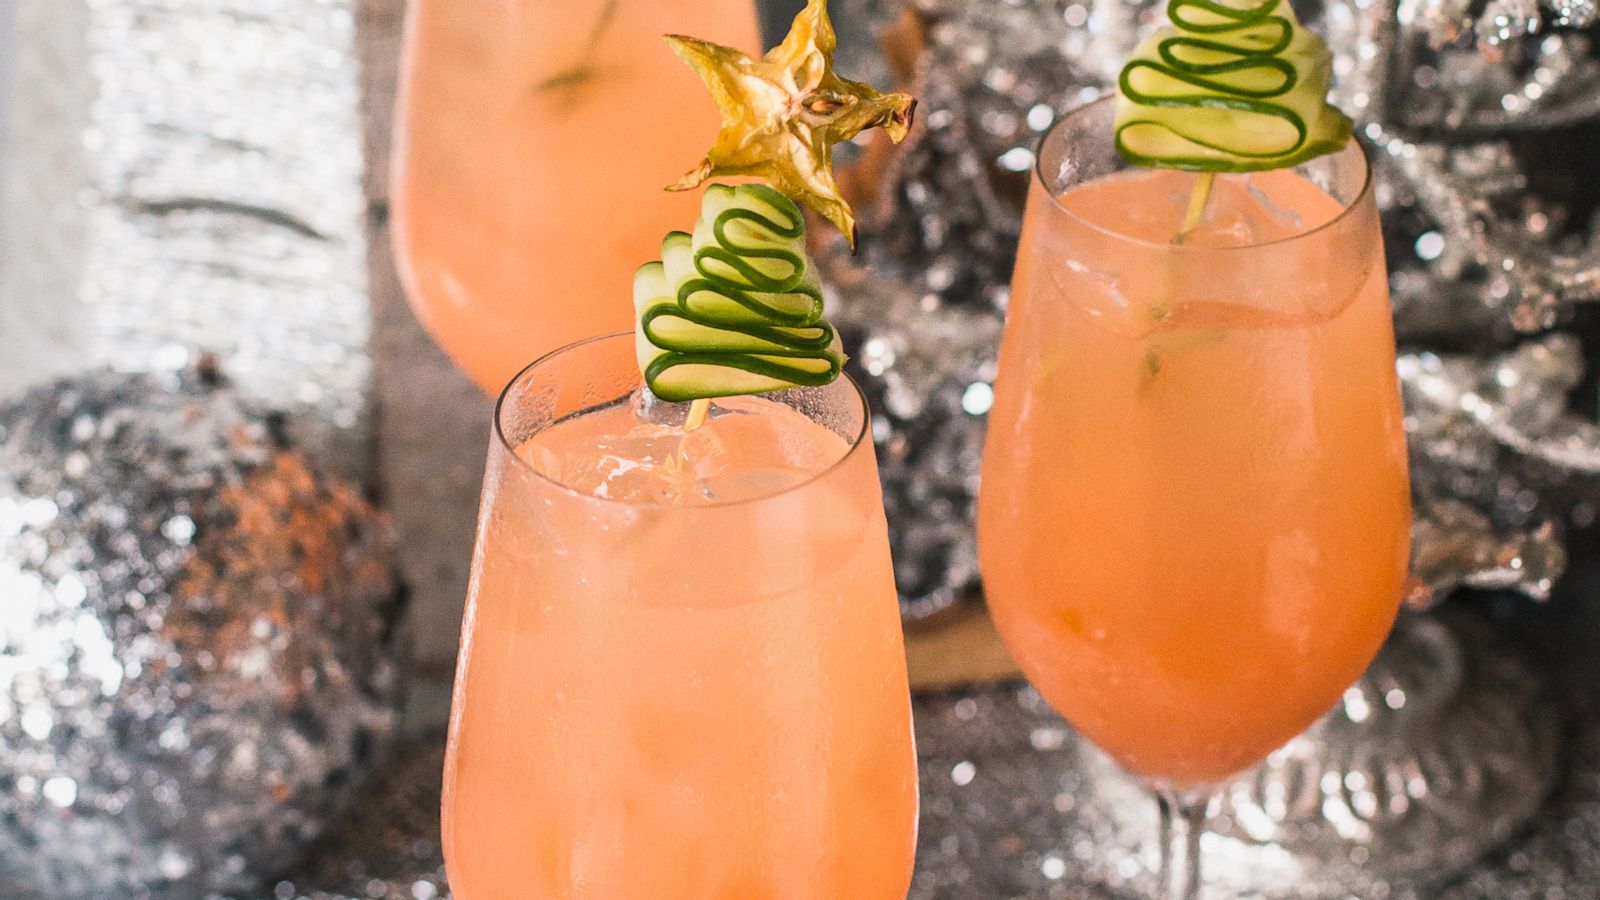 Festive cocktails to get you in the holiday spirit